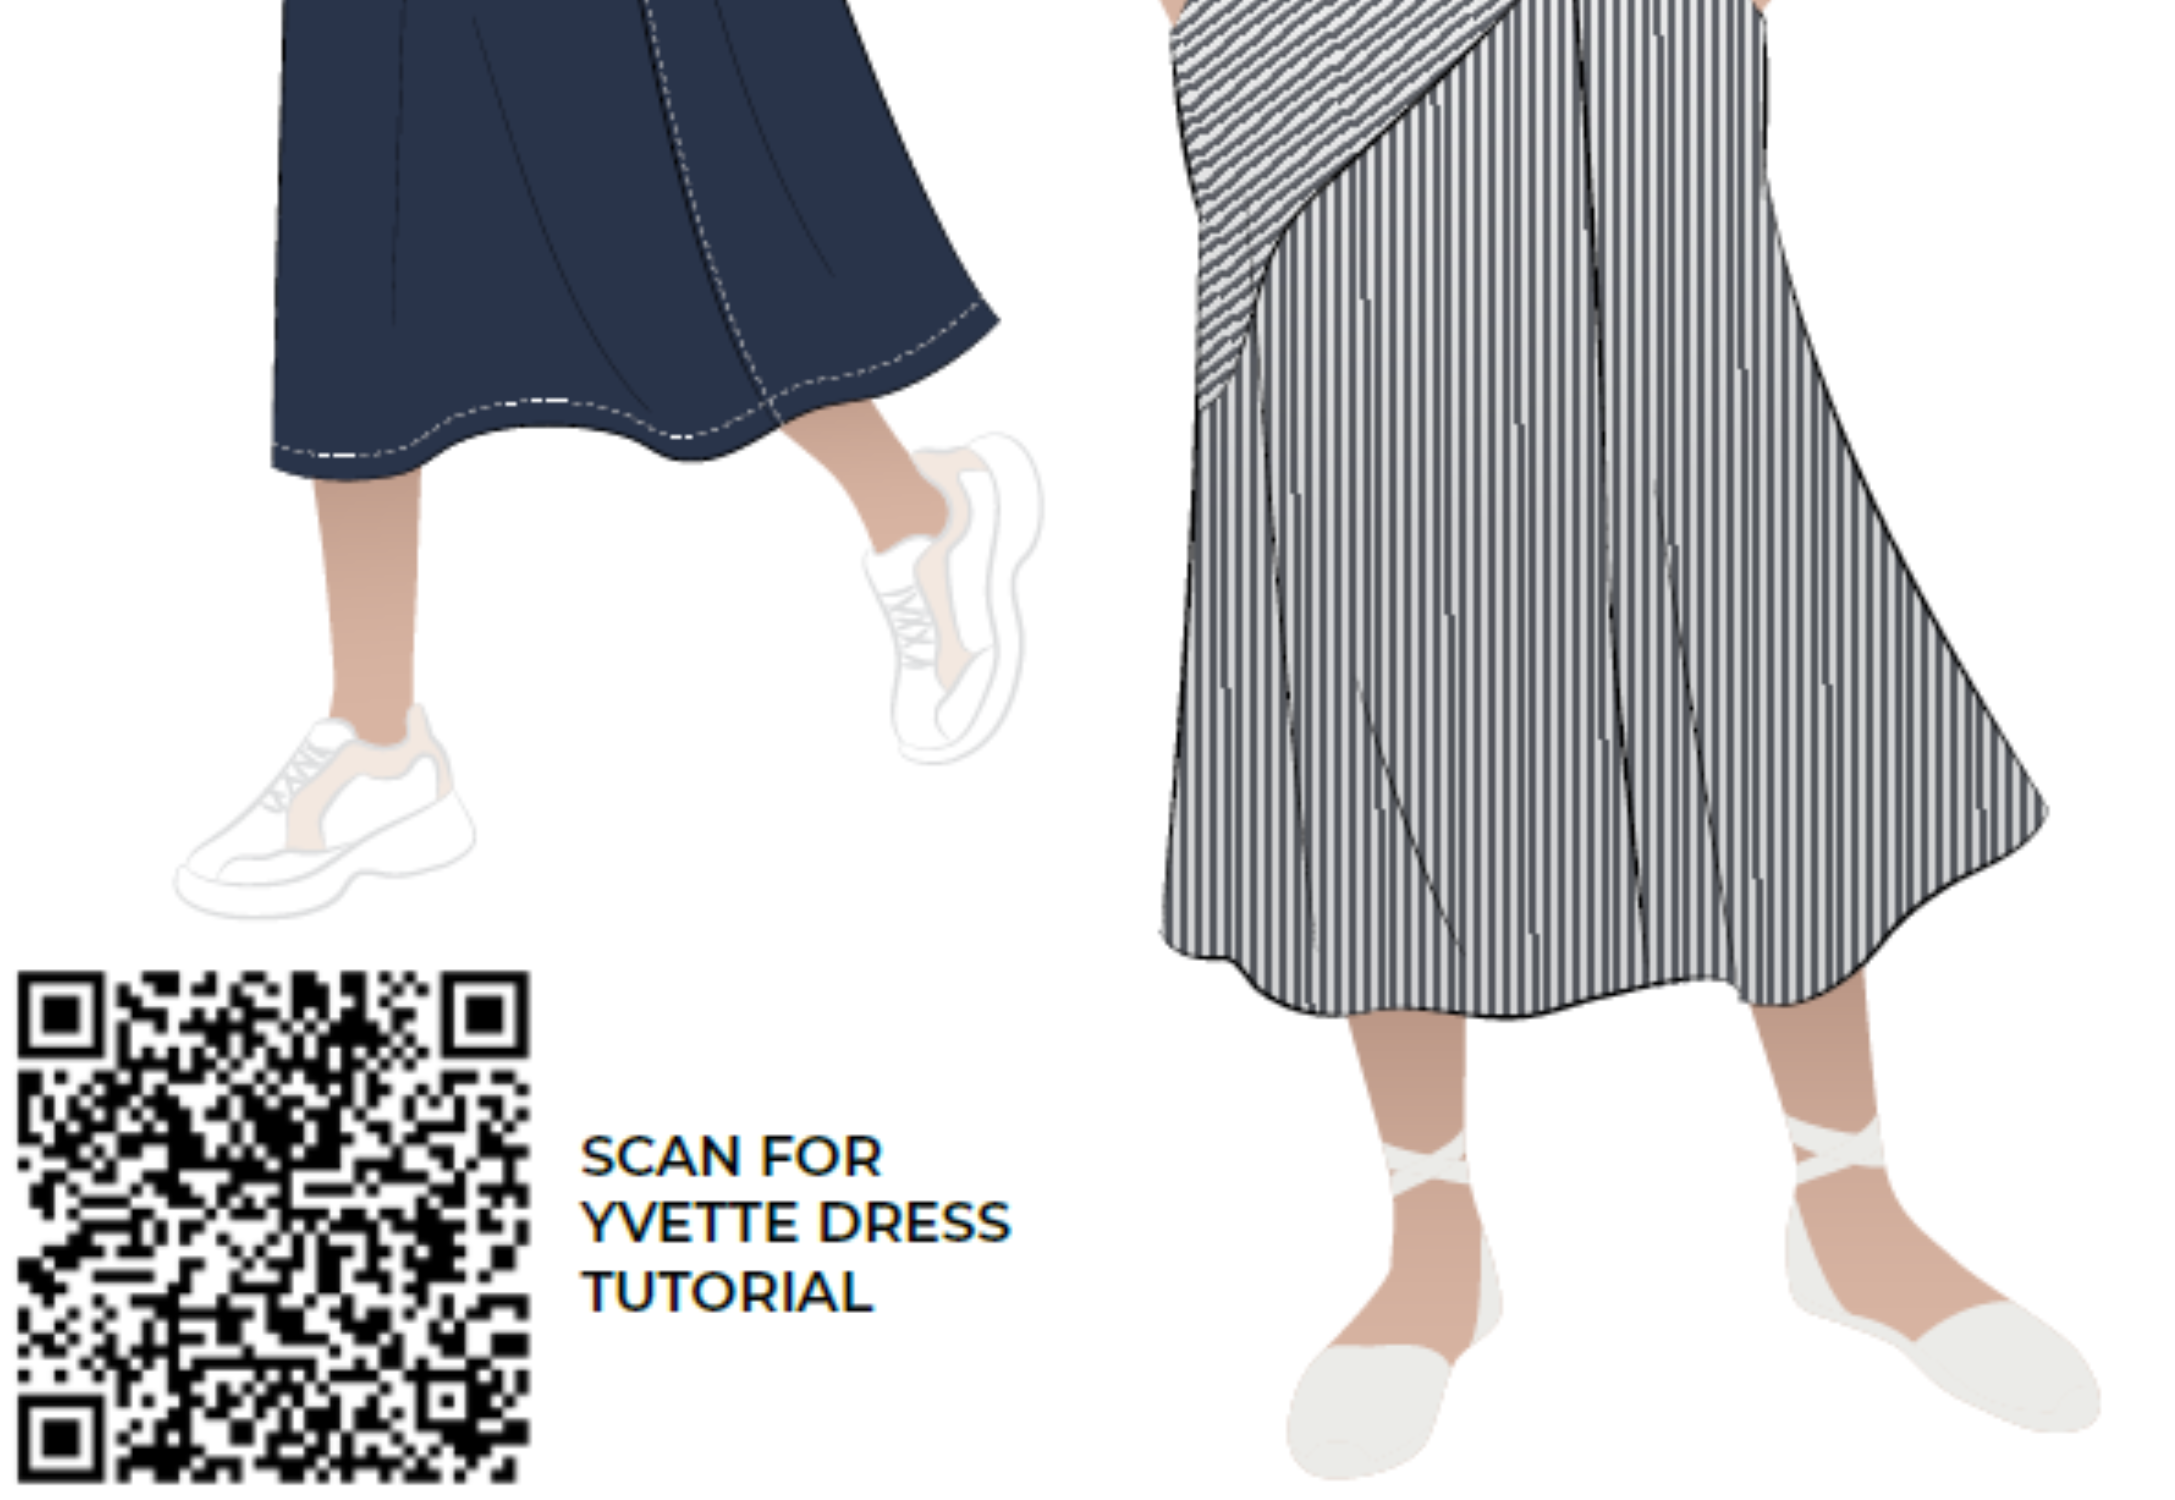 Find tutorials using the QR code on your construction sheet